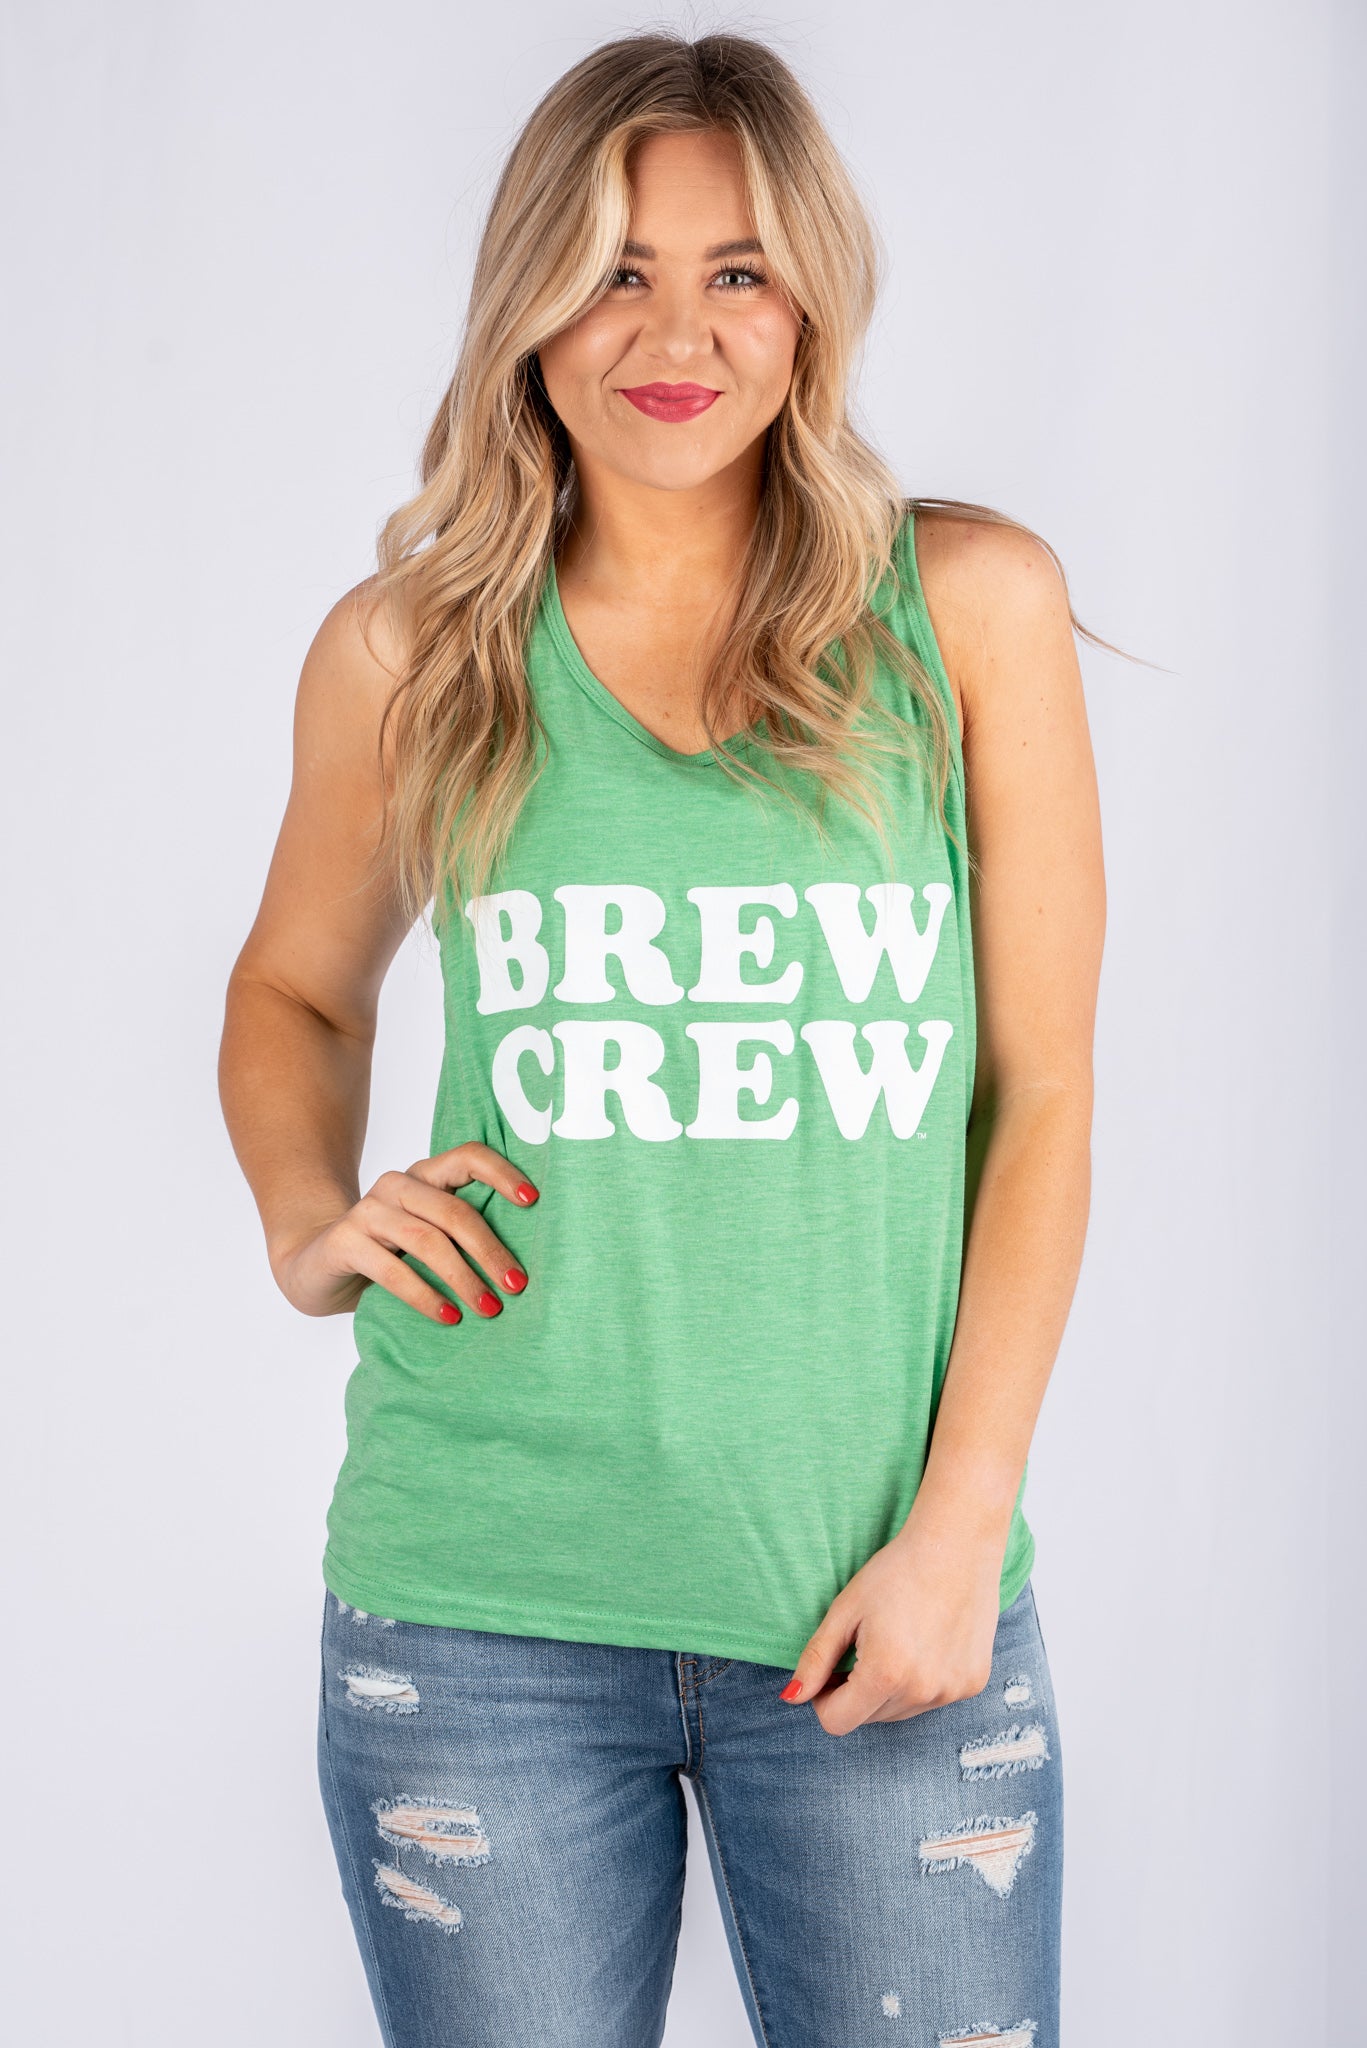 Brew Crew Green Unisex Tank - Trendy Tank Top - Cute Graphic Tee Fashion at Lush Fashion Lounge Boutique in Oklahoma